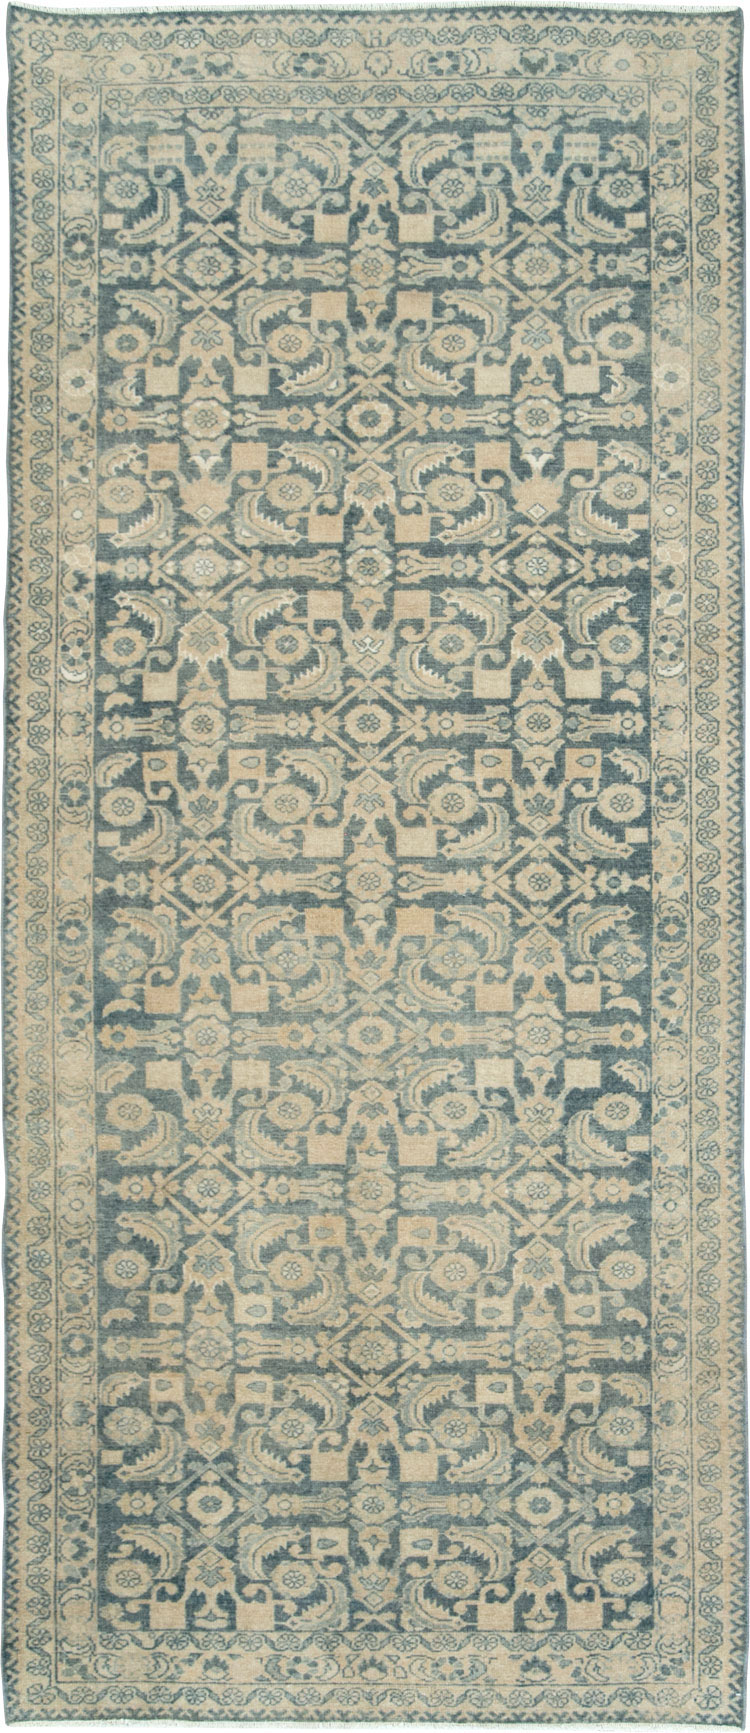 Vintage Persian Malayer Gallery Rug, No.28810 - Galerie Shabab